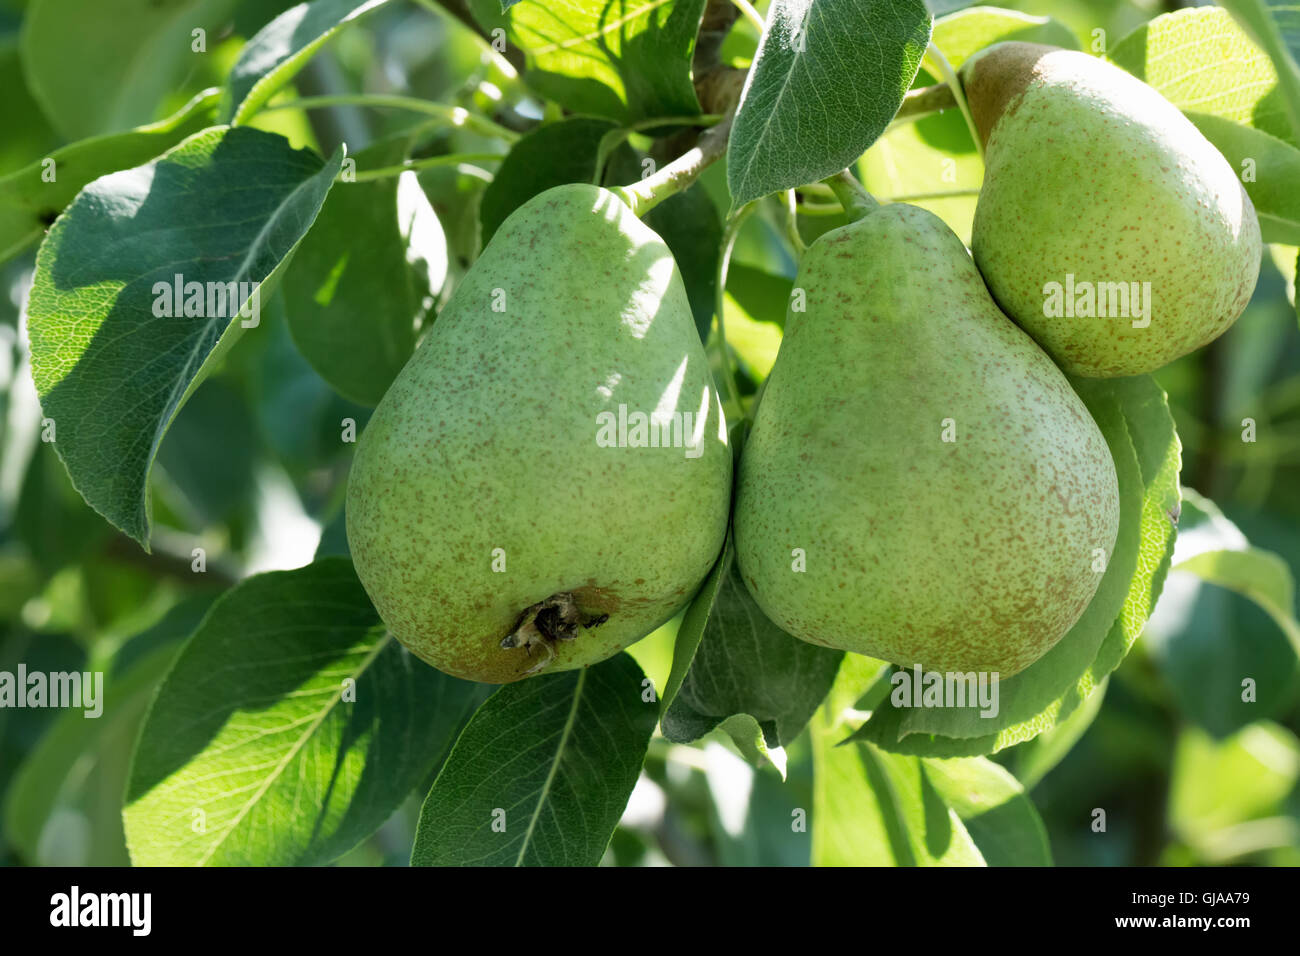 close up of green pears on tree. Stock Photo